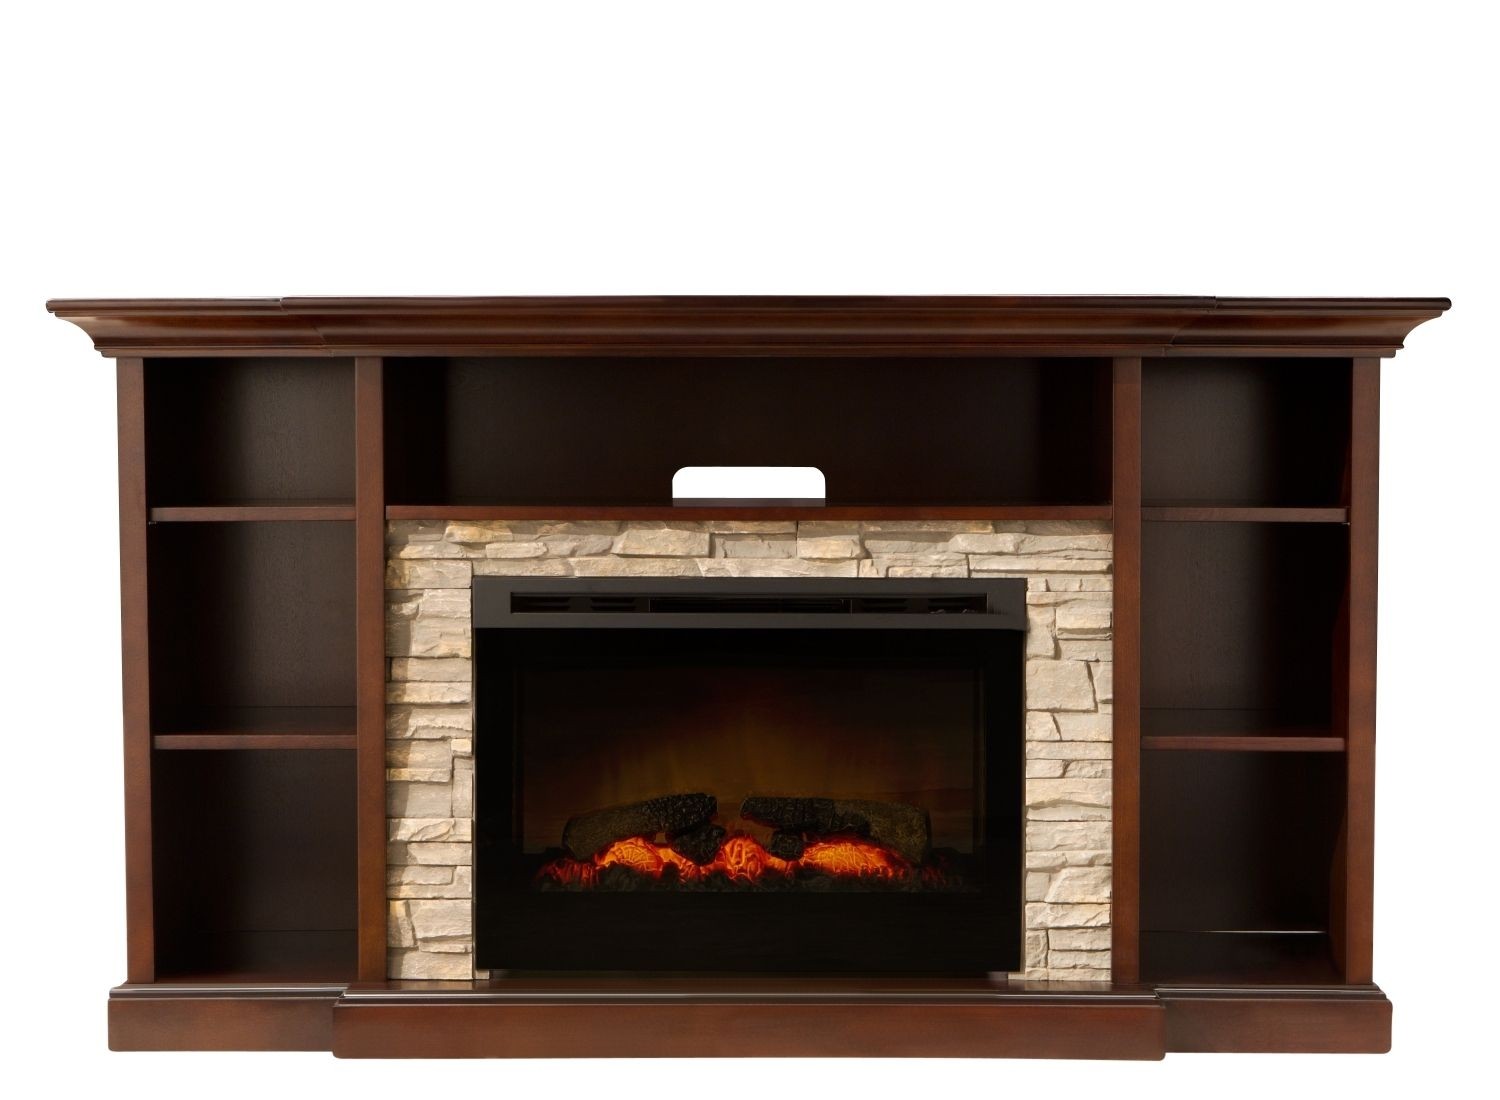 Fireplace with bookcases